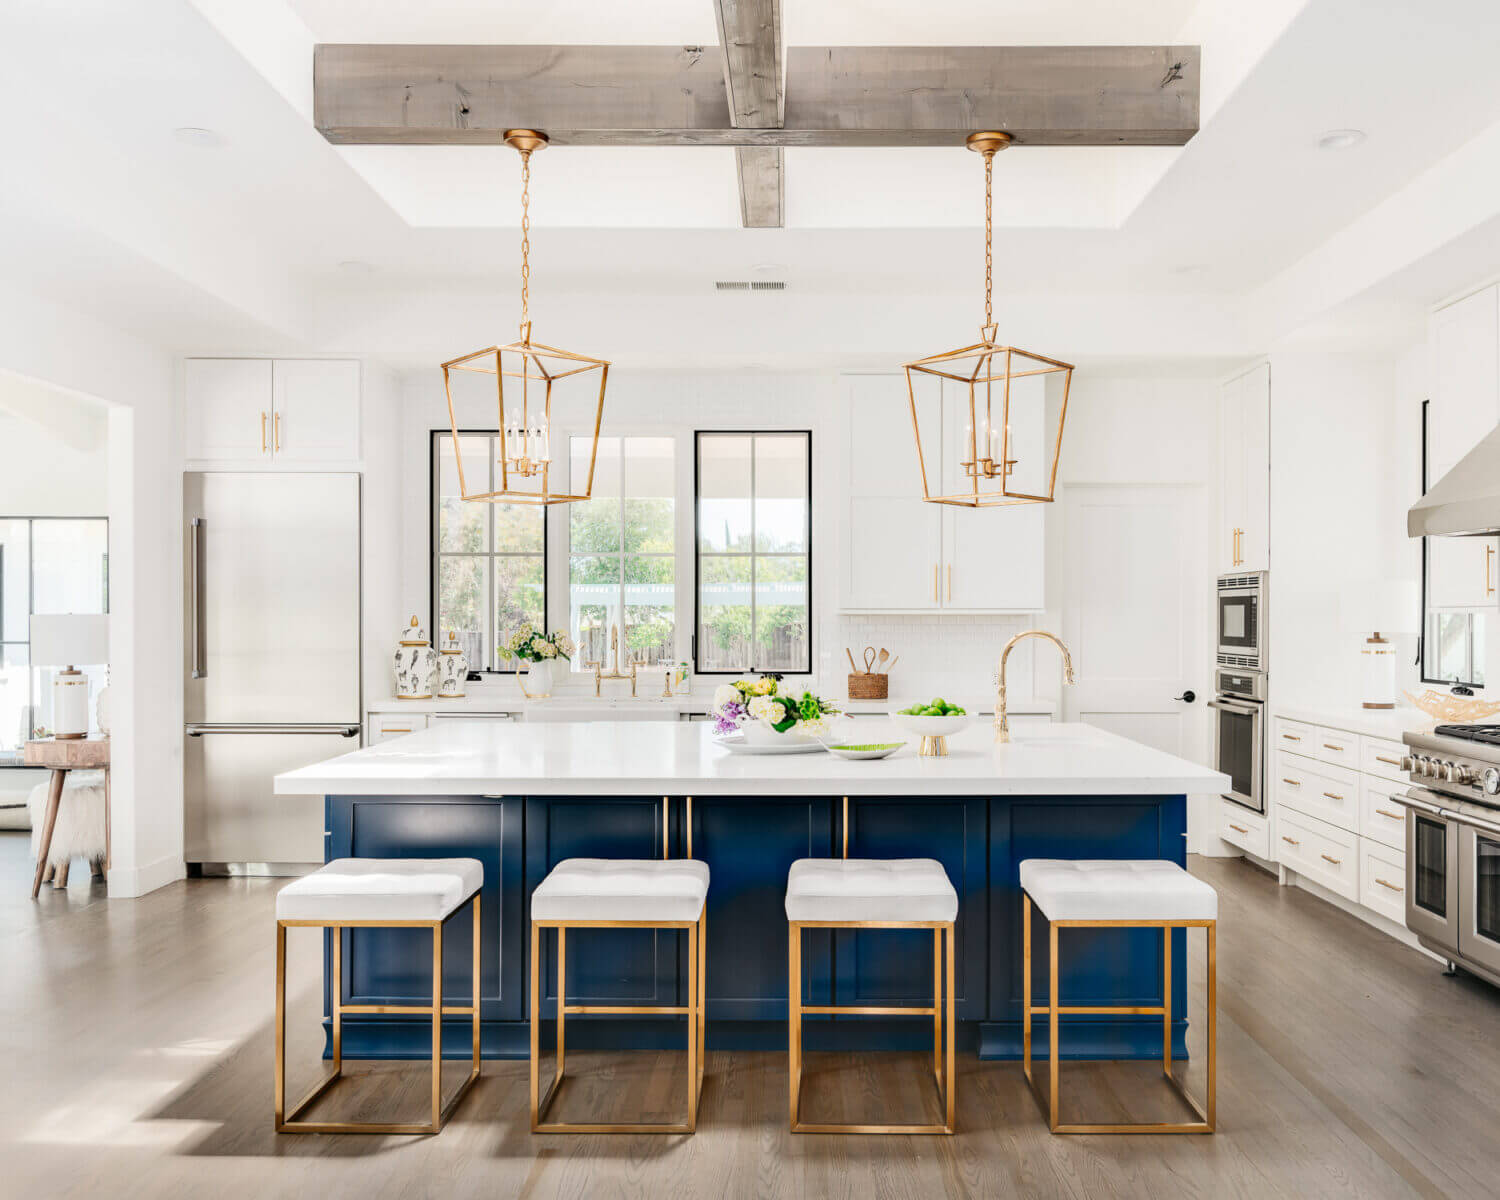 A bright white and navy blue trendy kitchen design with gold and bass hardware & light fixtures.